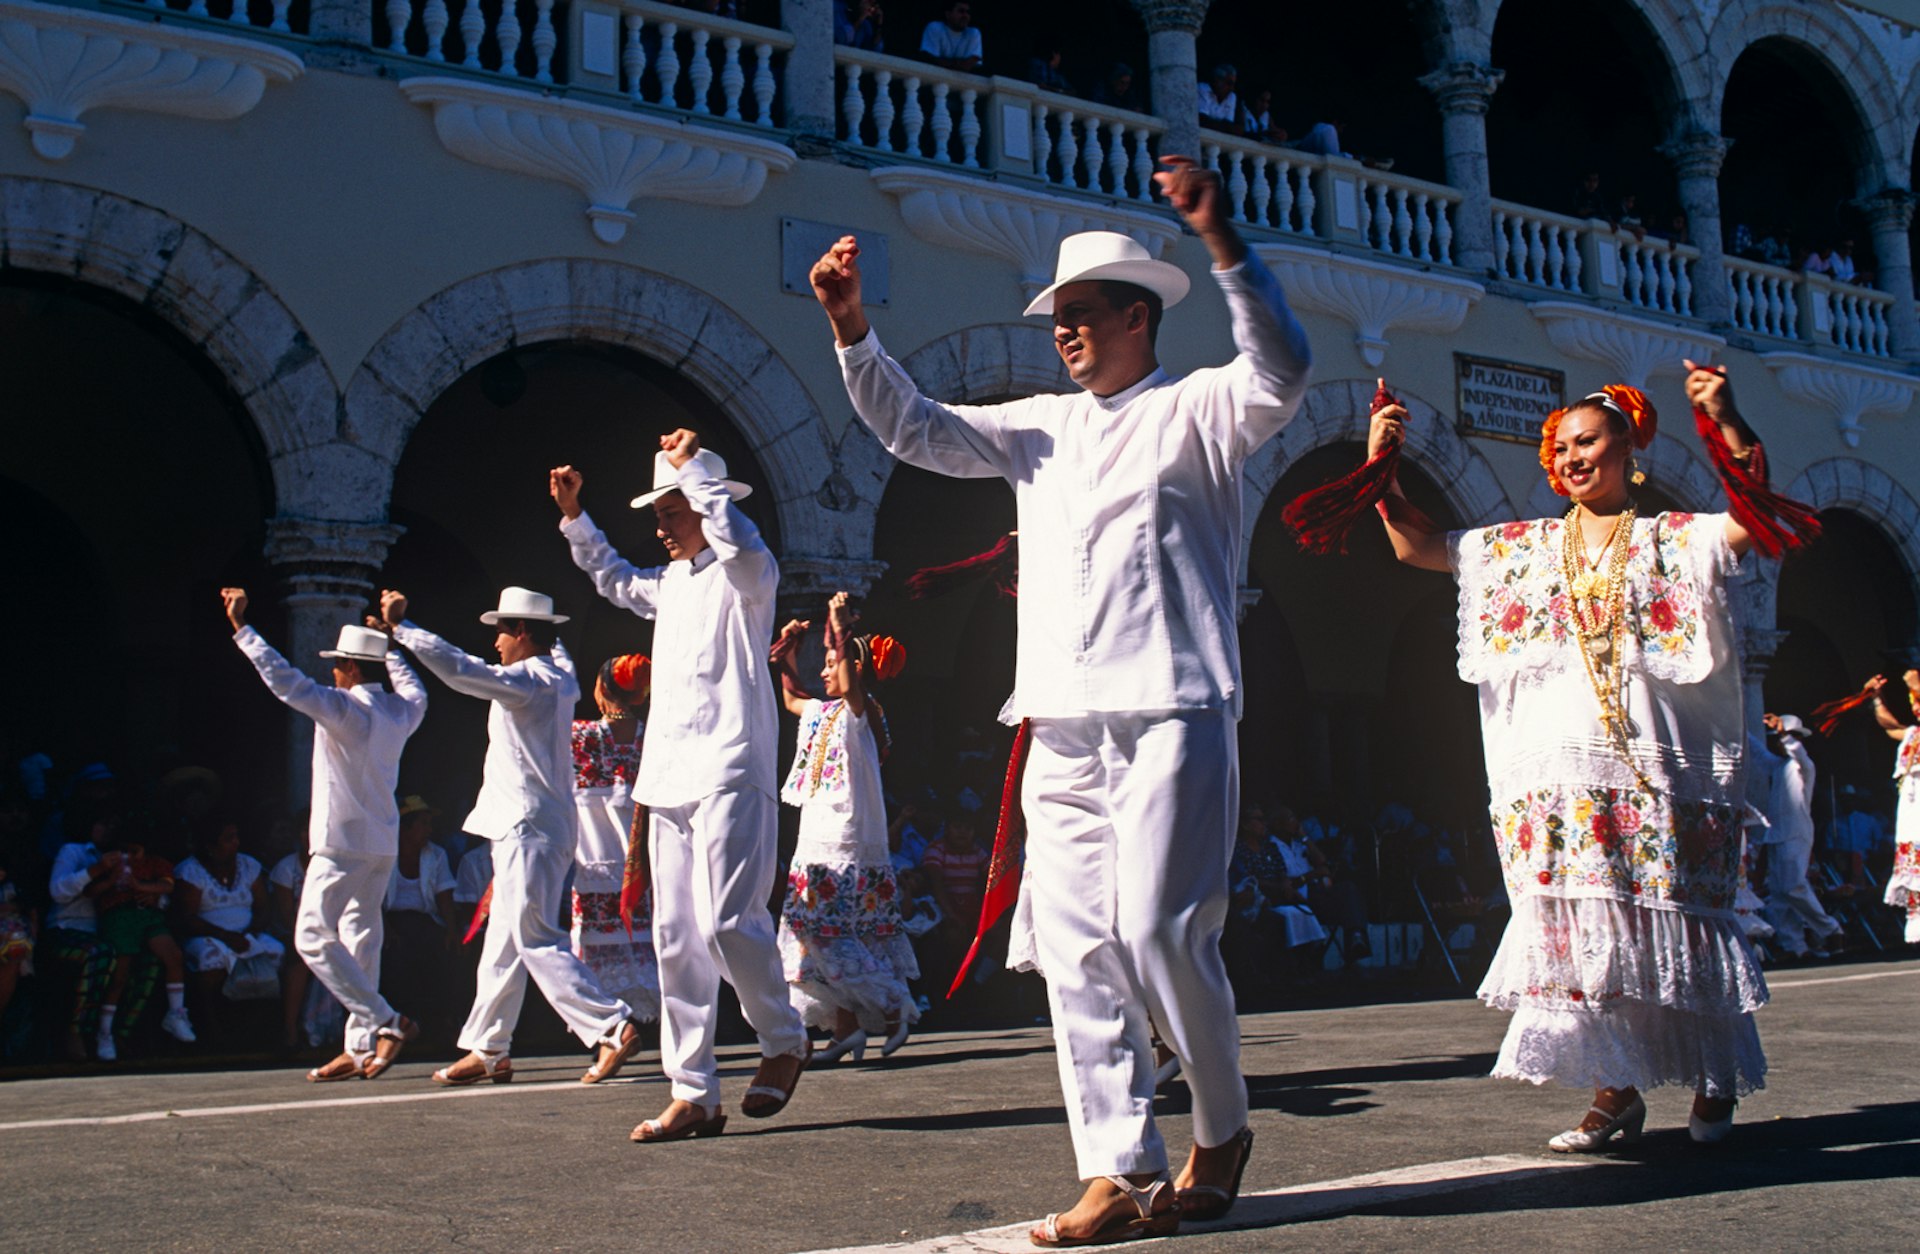 Men in white outfits and women in colorfully embroidered dresses perform in the street in front of a colonial building